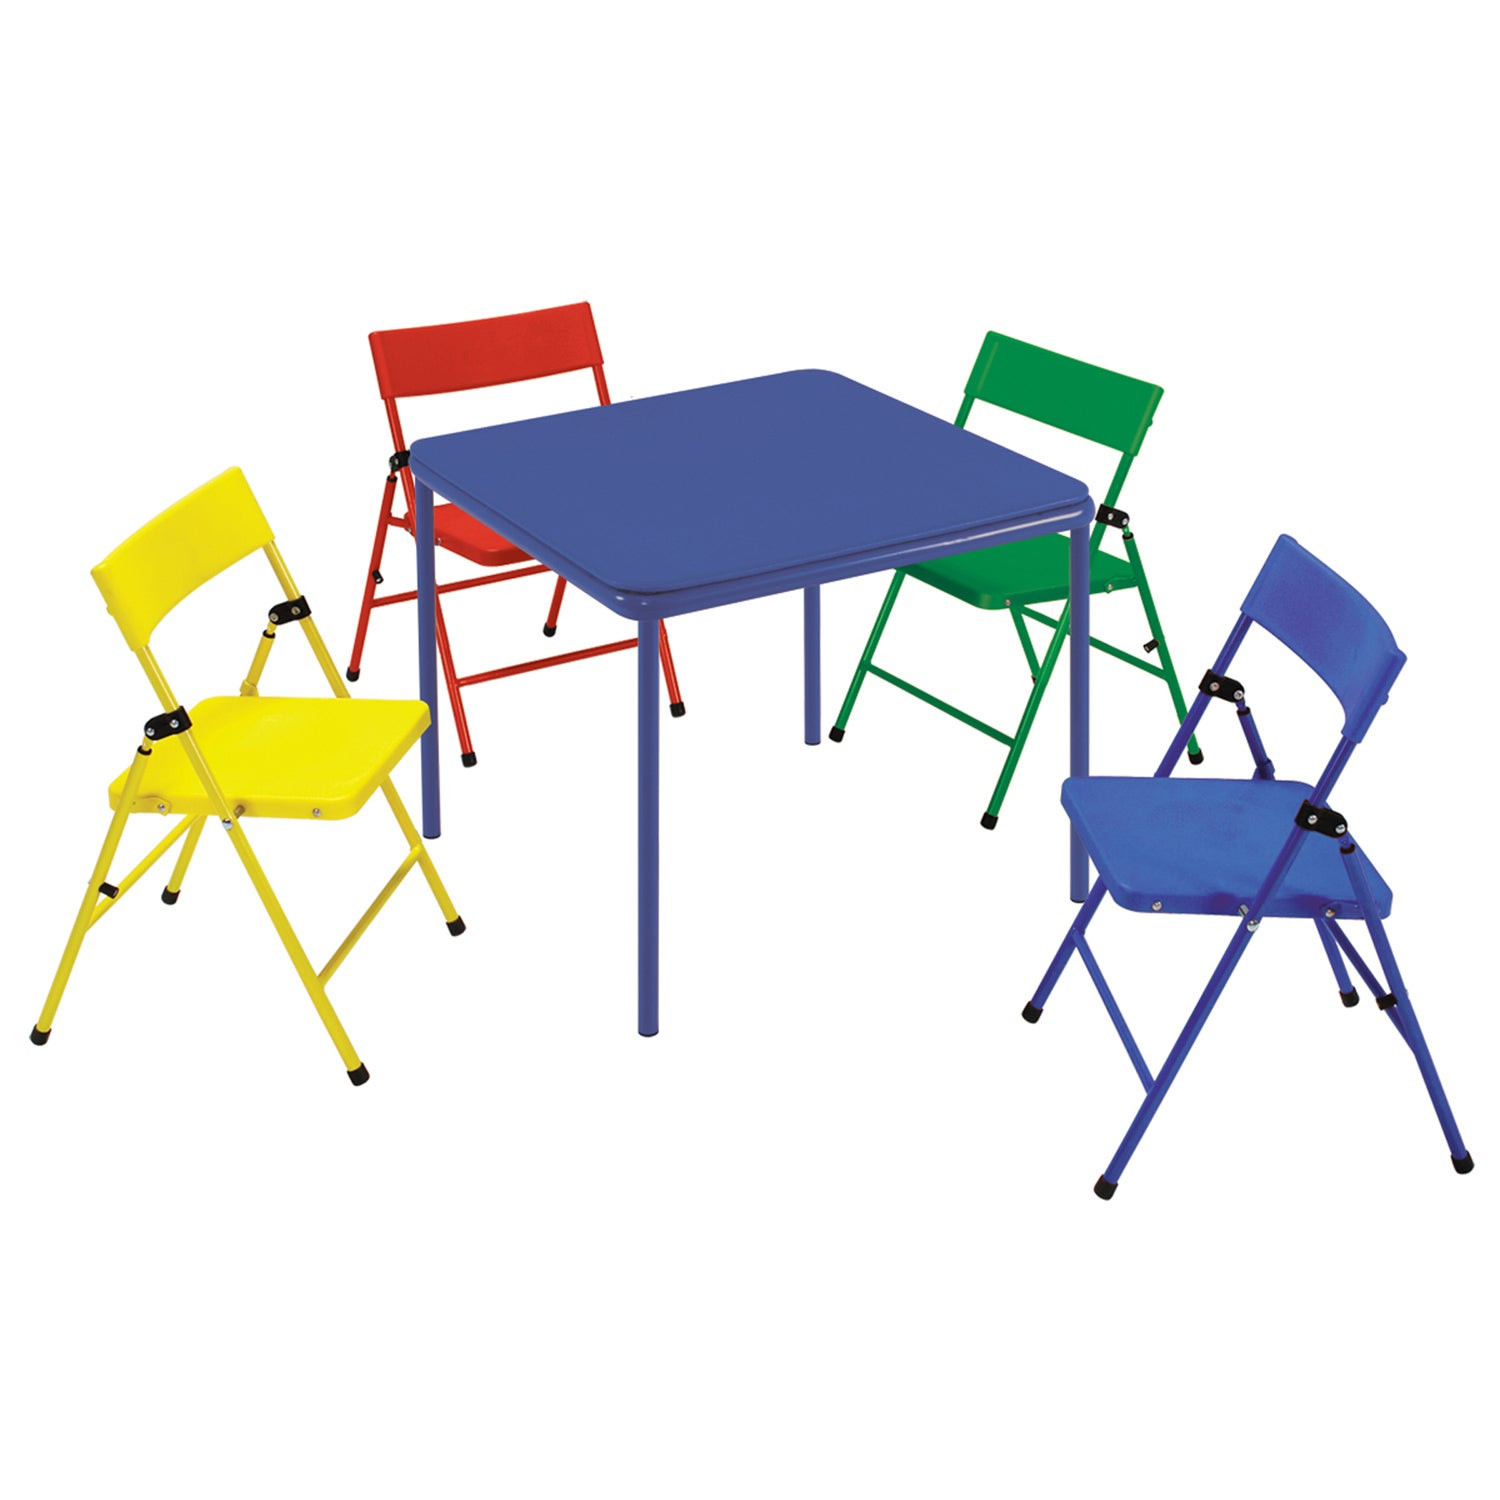 Kids Folding Table
 Cosco Kid s 5 piece Colored Folding Chair and Table Set